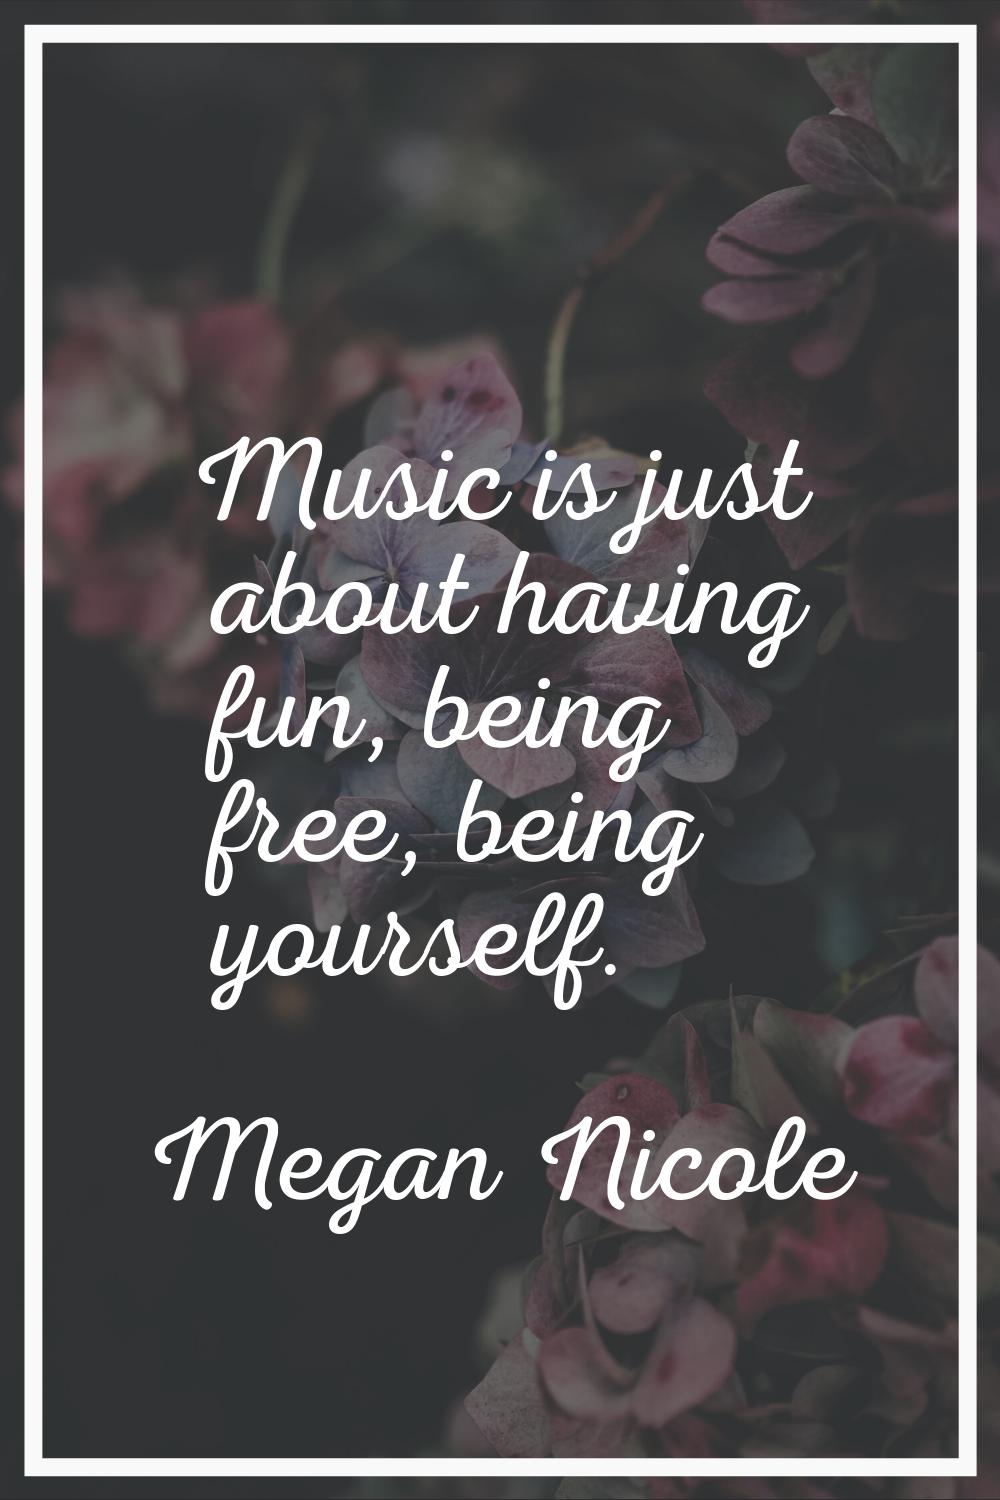 Music is just about having fun, being free, being yourself.